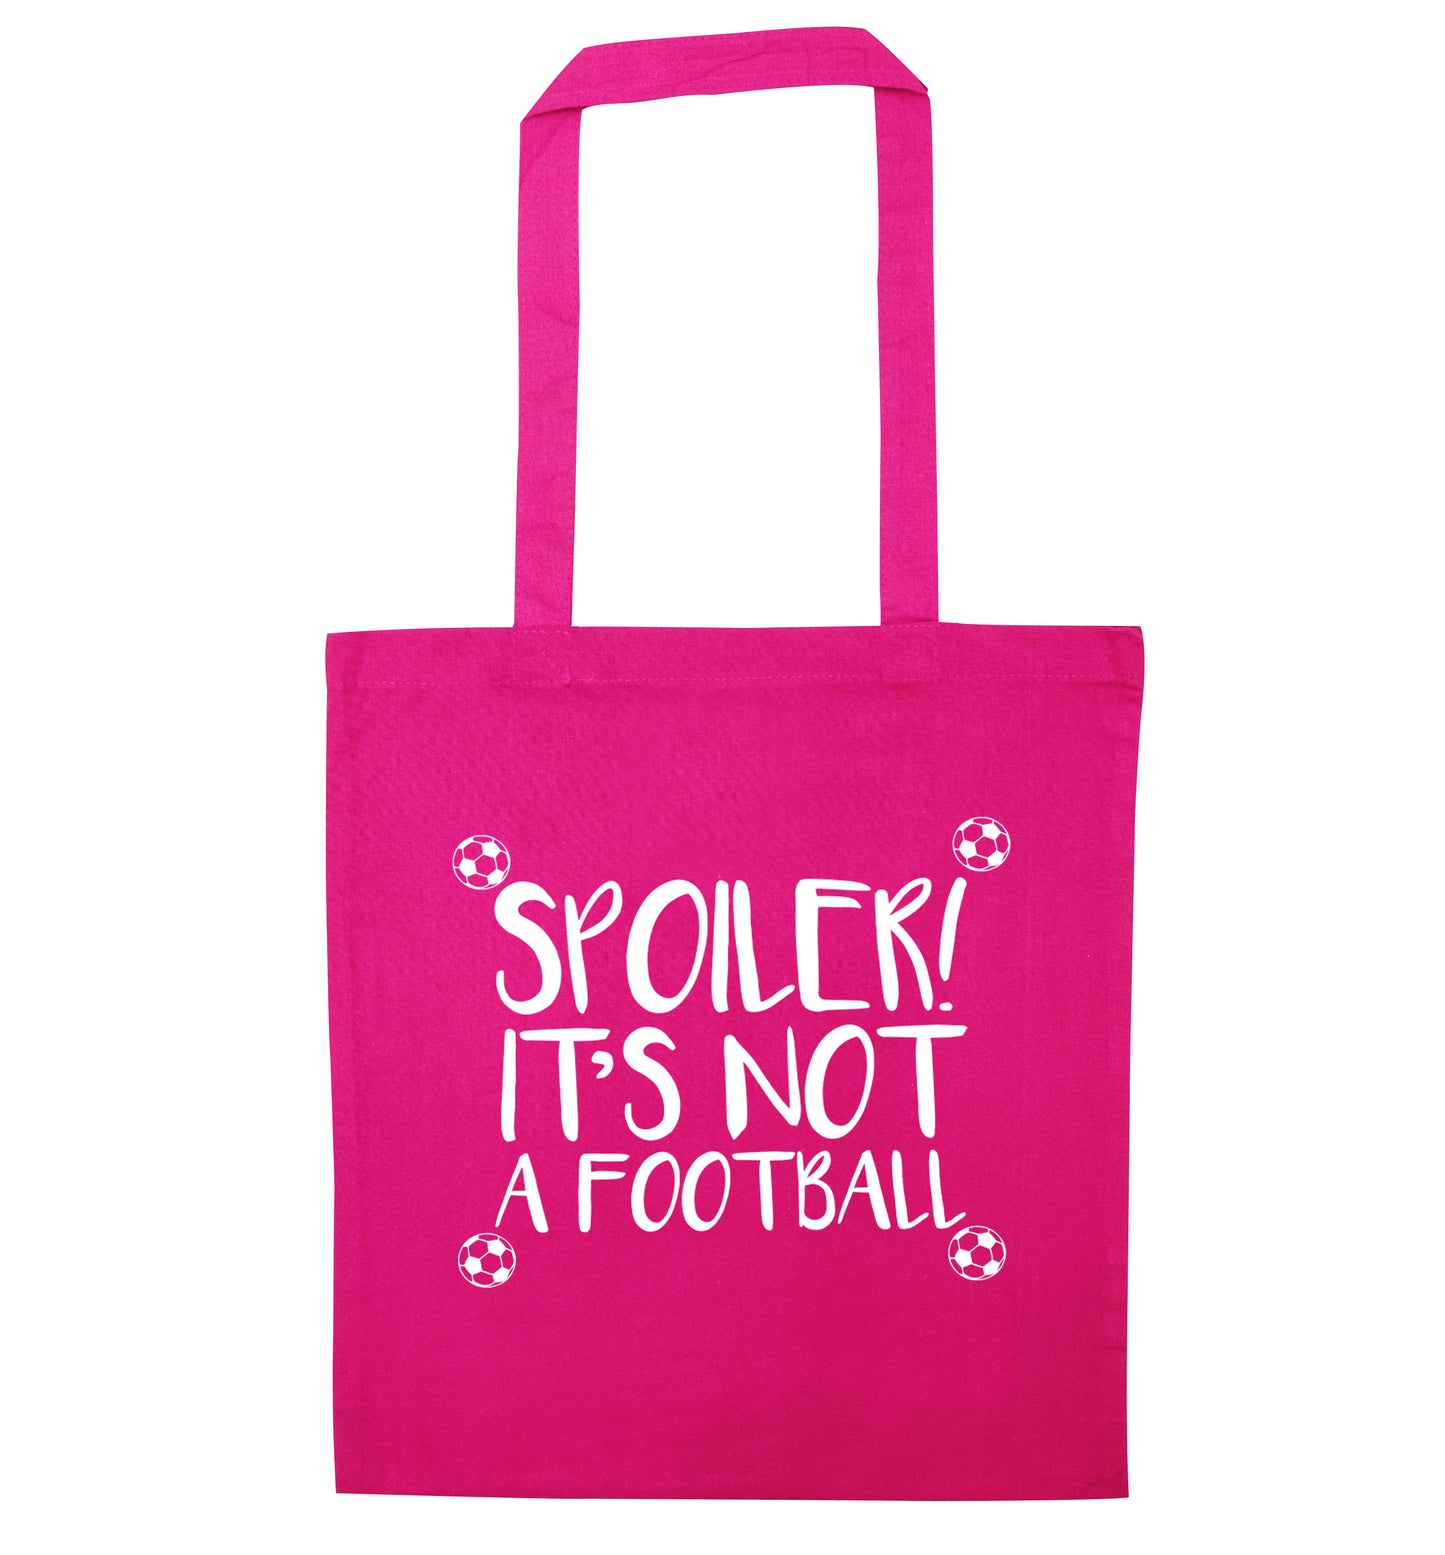 Spoiler it's not a football pink tote bag